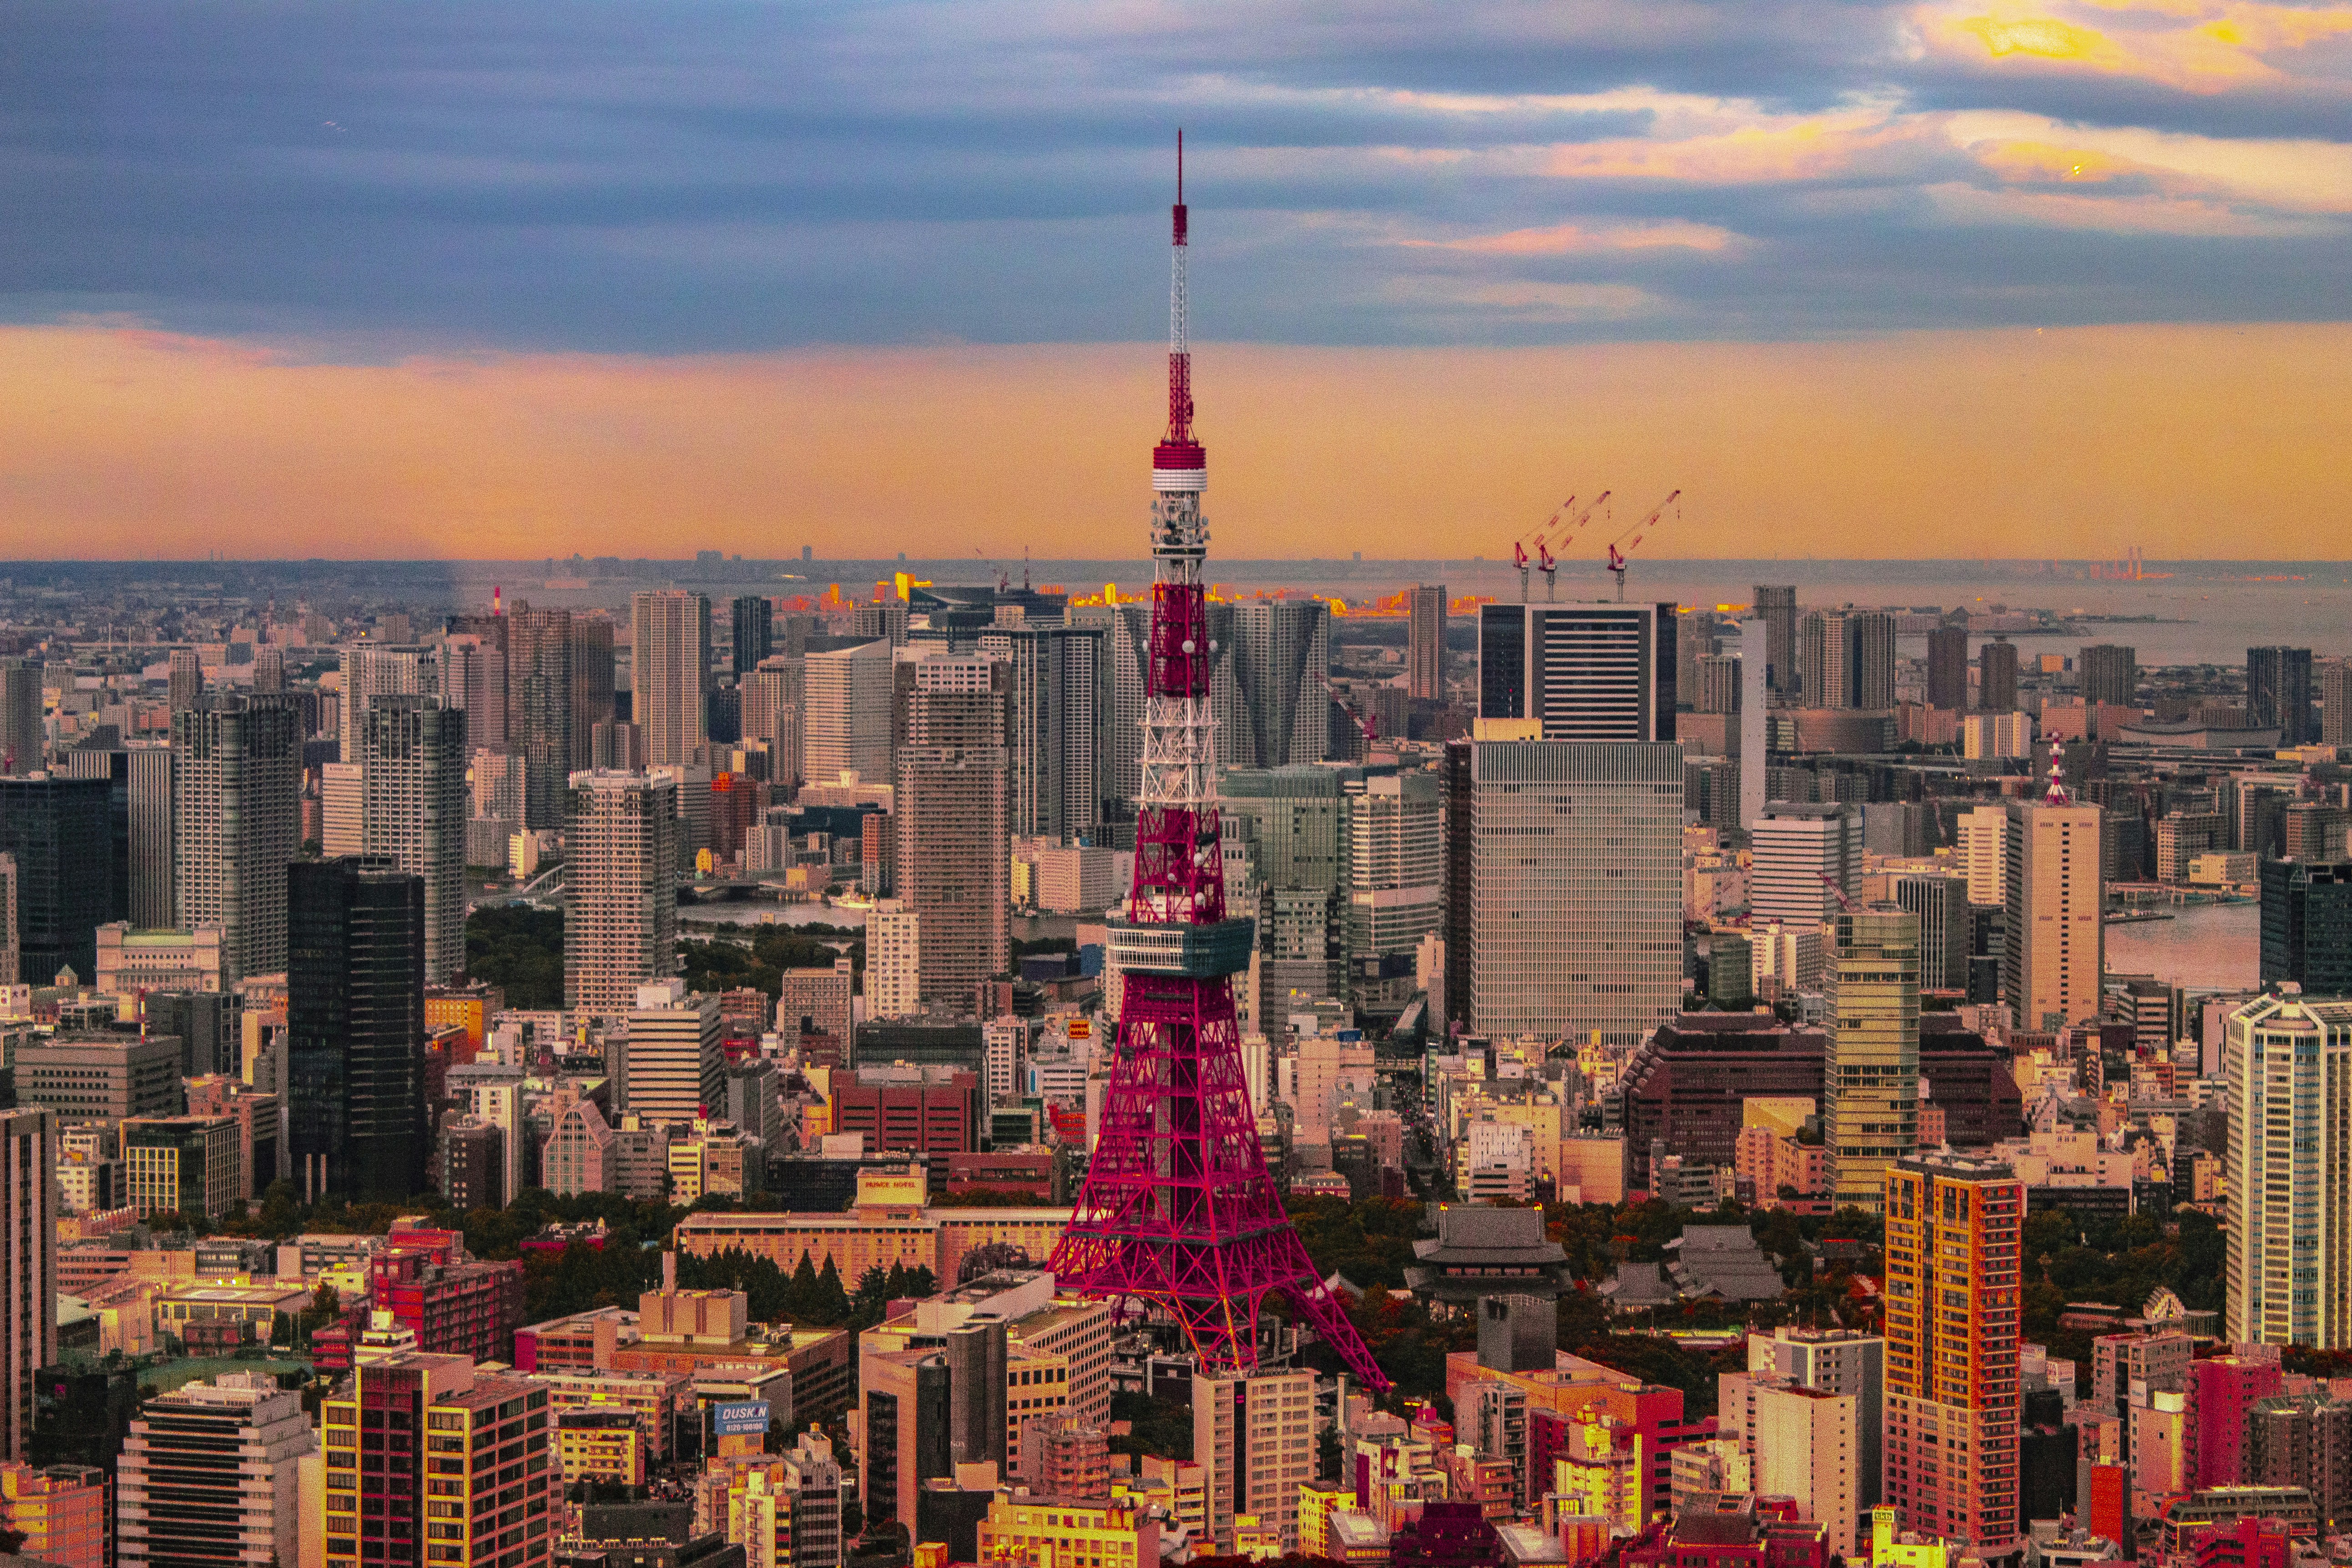 Radio Tower in Tokyo during the Golden Hour